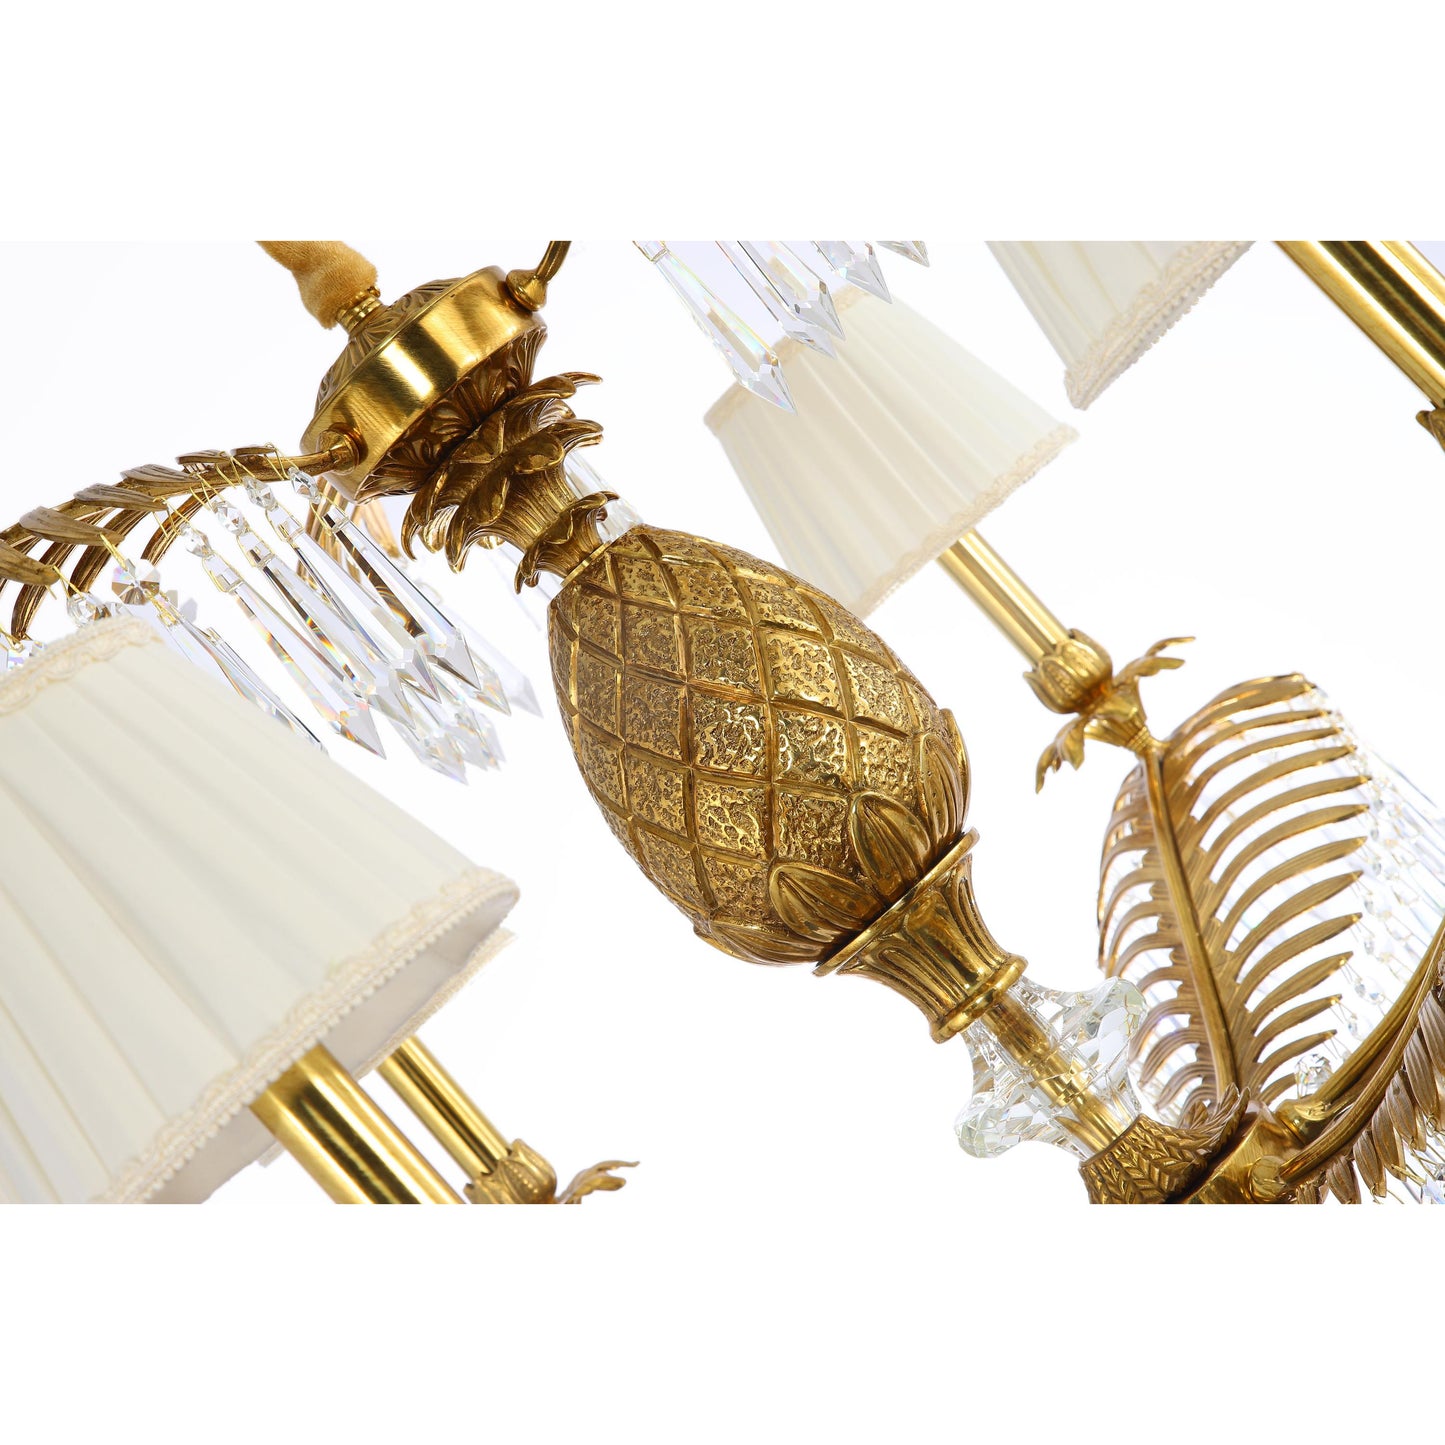 DECOELEVEN ™ Art Deco Style Pineapple and Palm Branch Chandelier